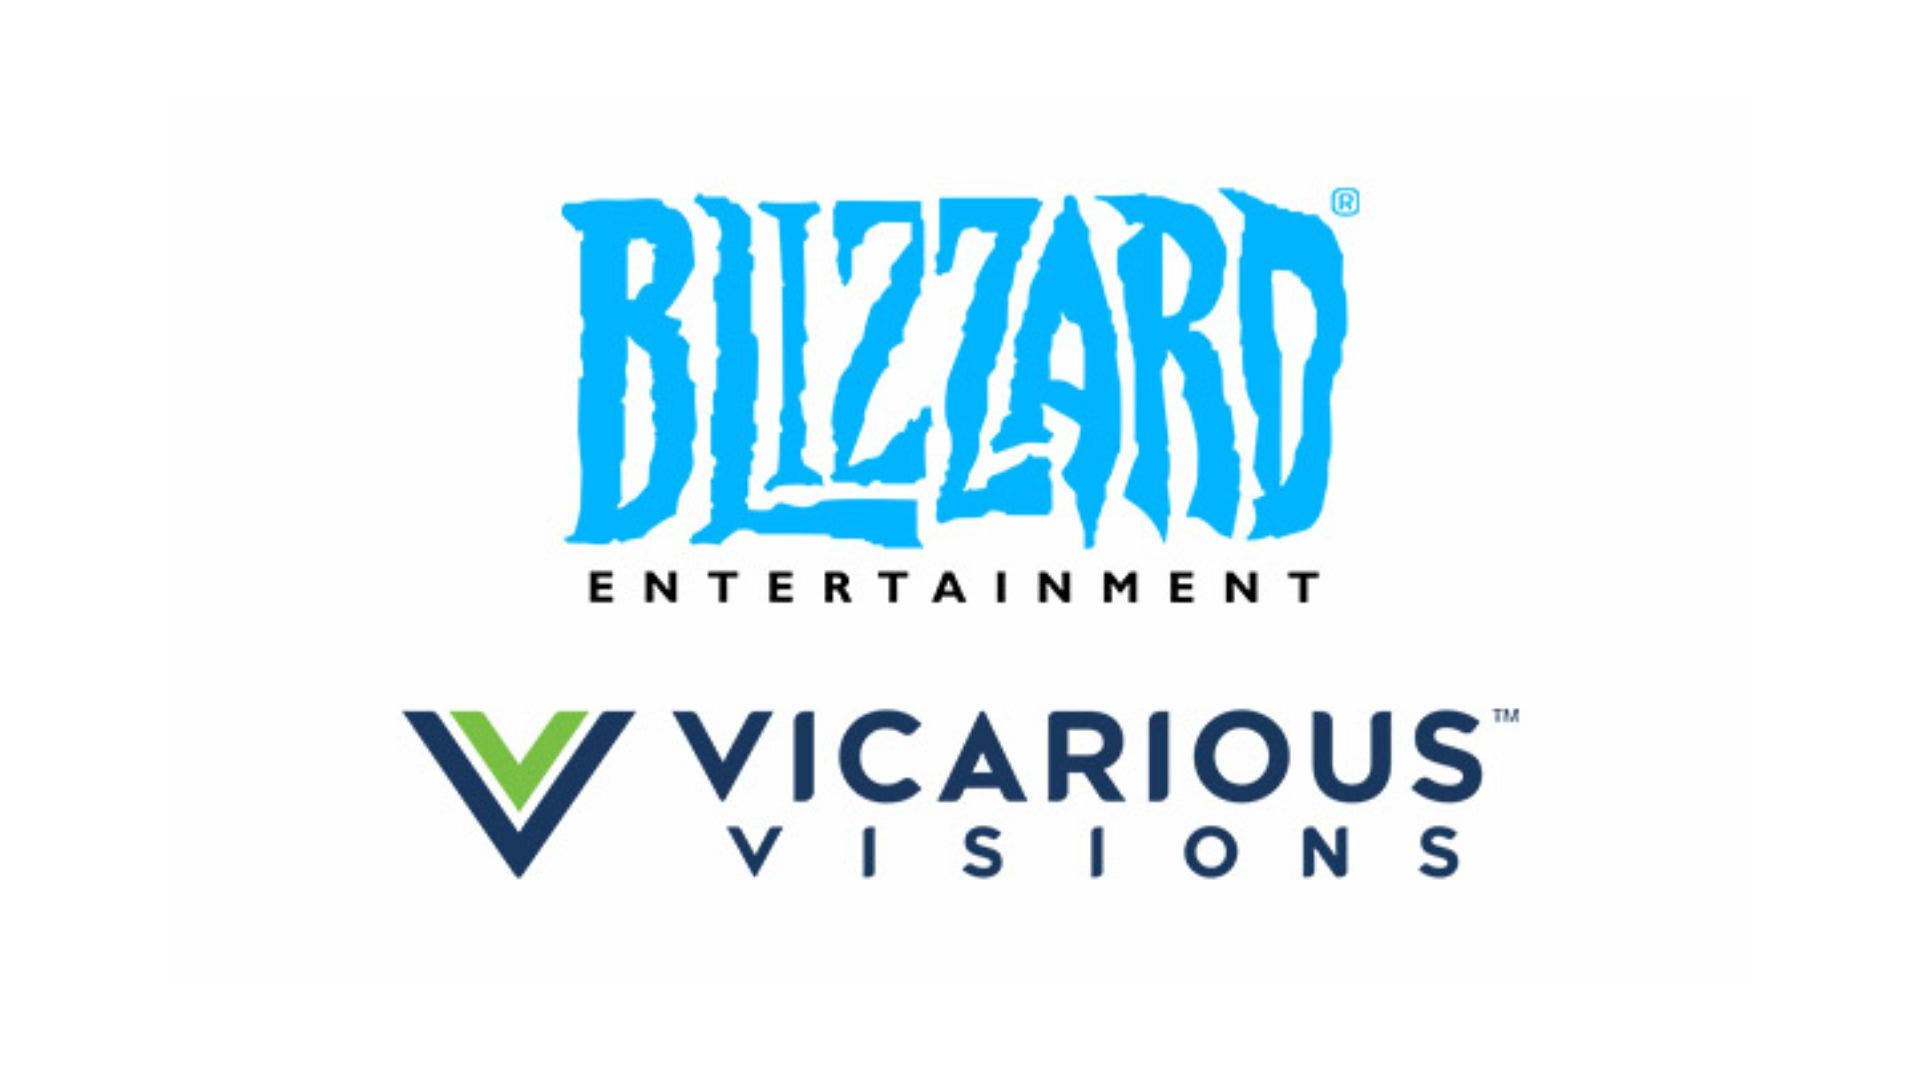 Vicarious Visions se funde con Blizzard